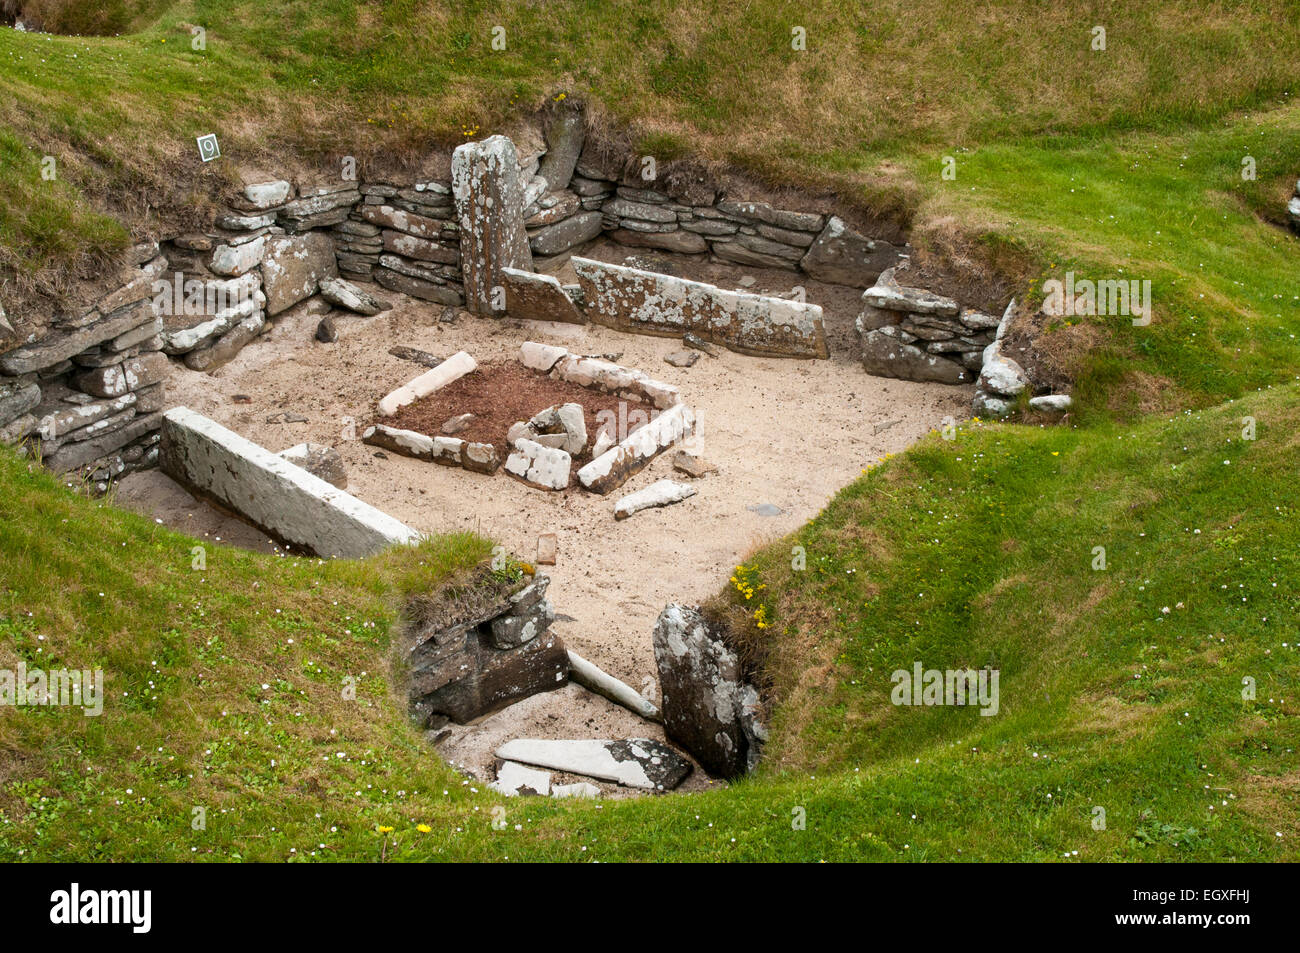 Skara Brae is a neolithic settlement on the nowadays Orkney Islands in Scotland and was occupied between 3180 and 2500 BCE. Stock Photo